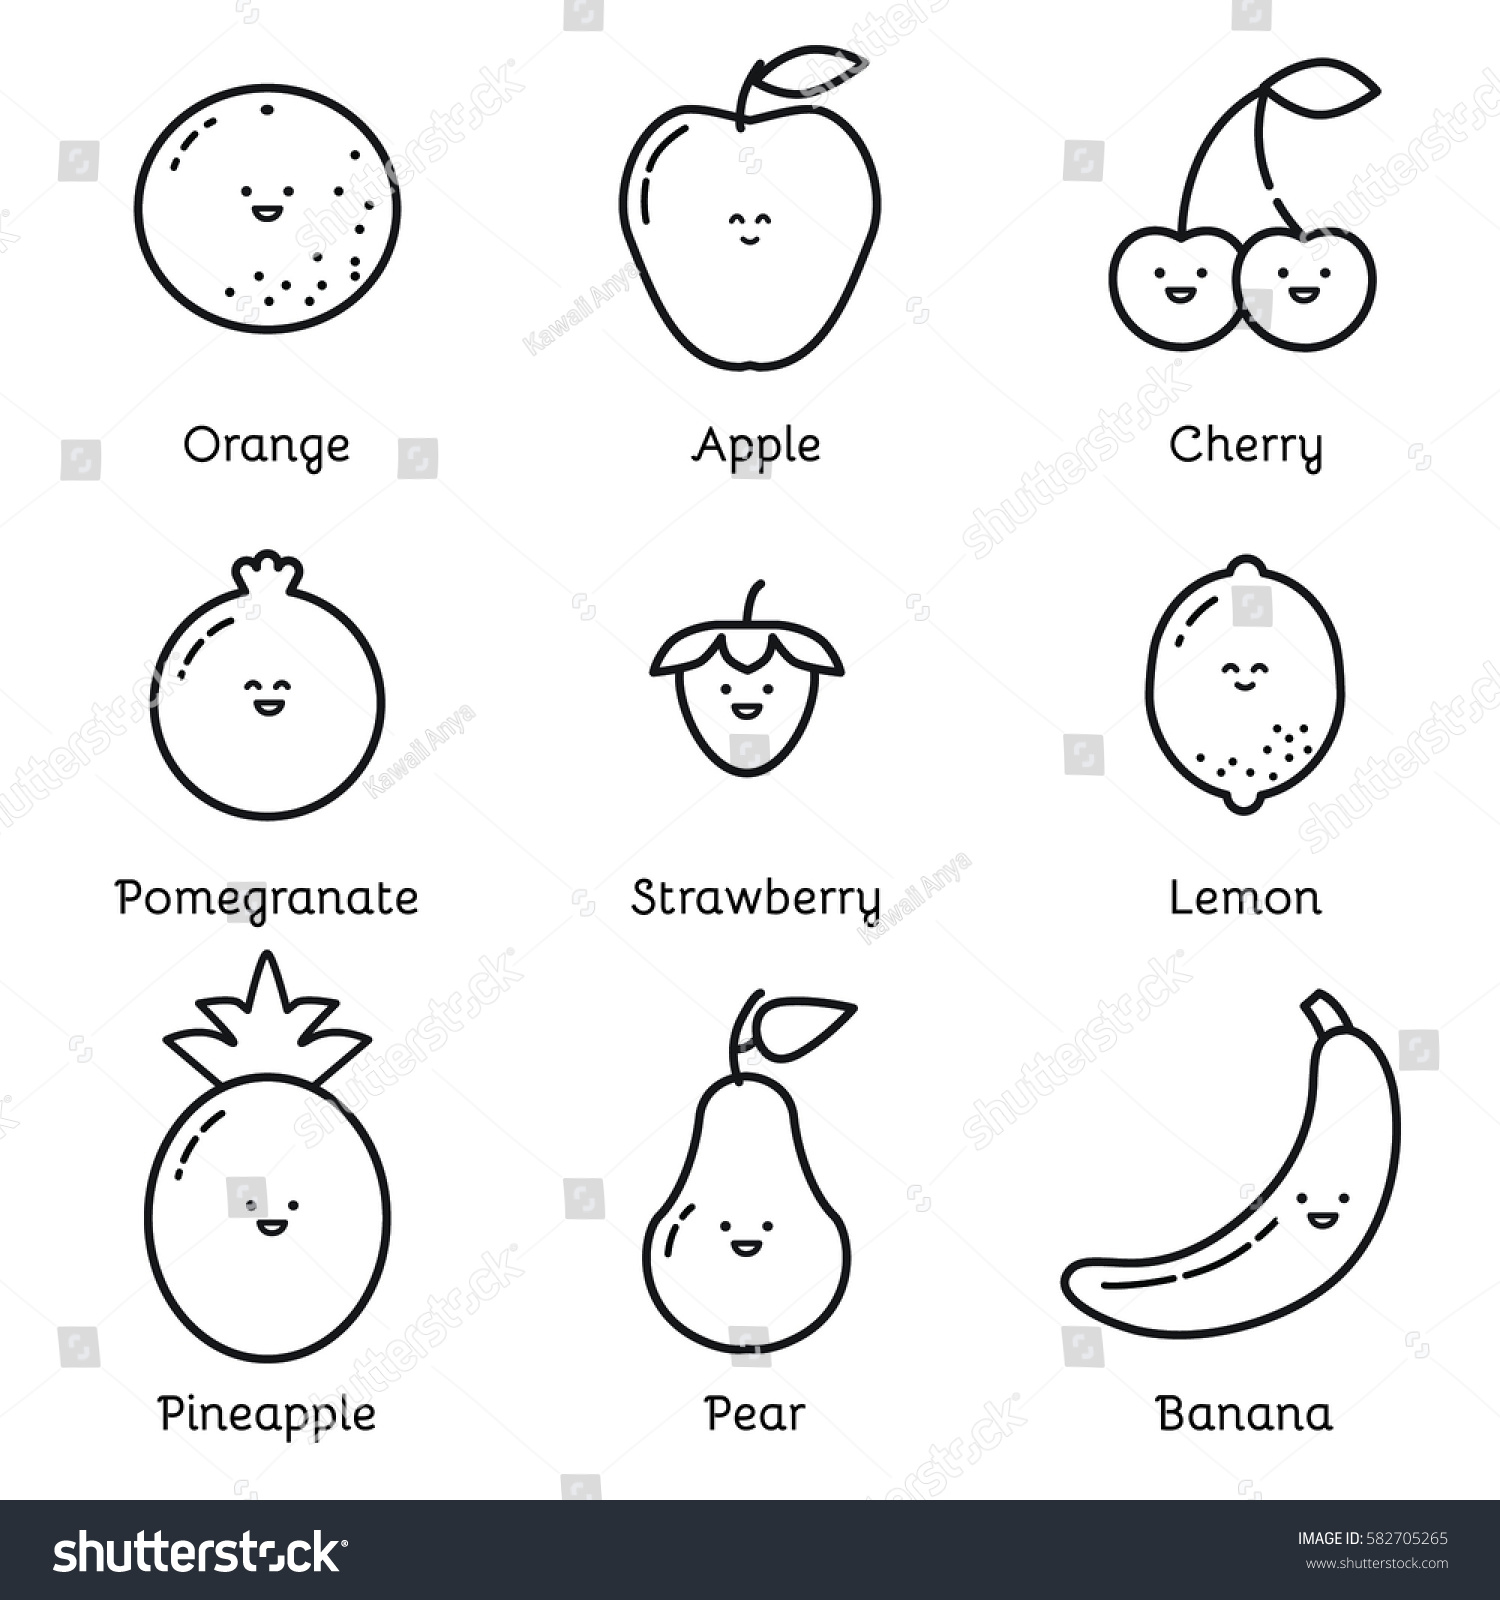 Cute Smiling Fruits Coloring Page Children Stock Vector (Royalty Free